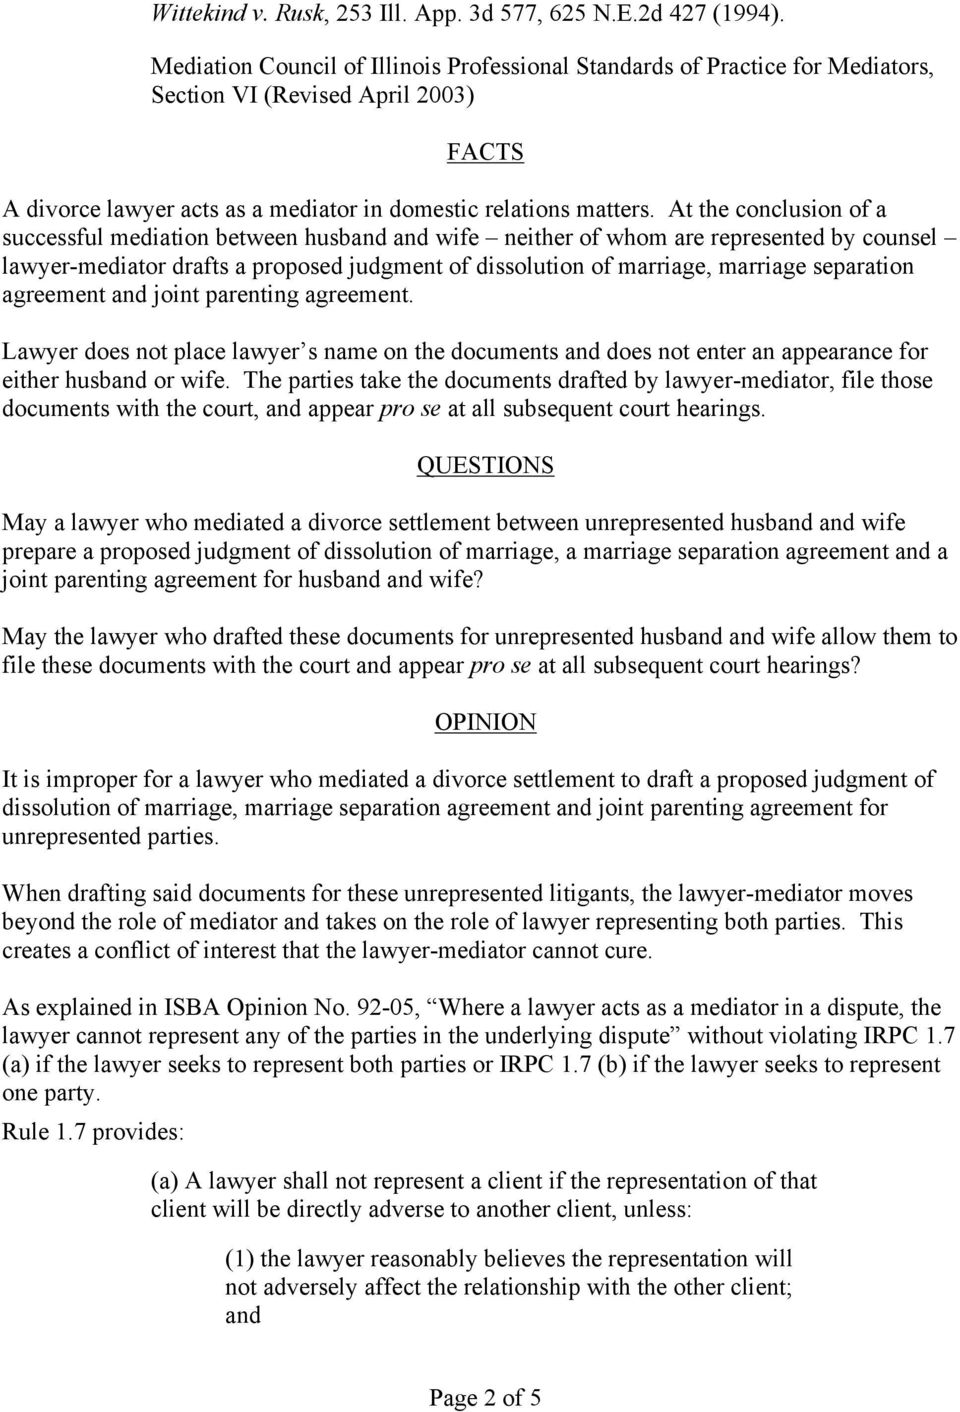 At the conclusion of a successful mediation between husband and wife neither of whom are represented by counsel lawyer-mediator drafts a proposed judgment of dissolution of marriage, marriage